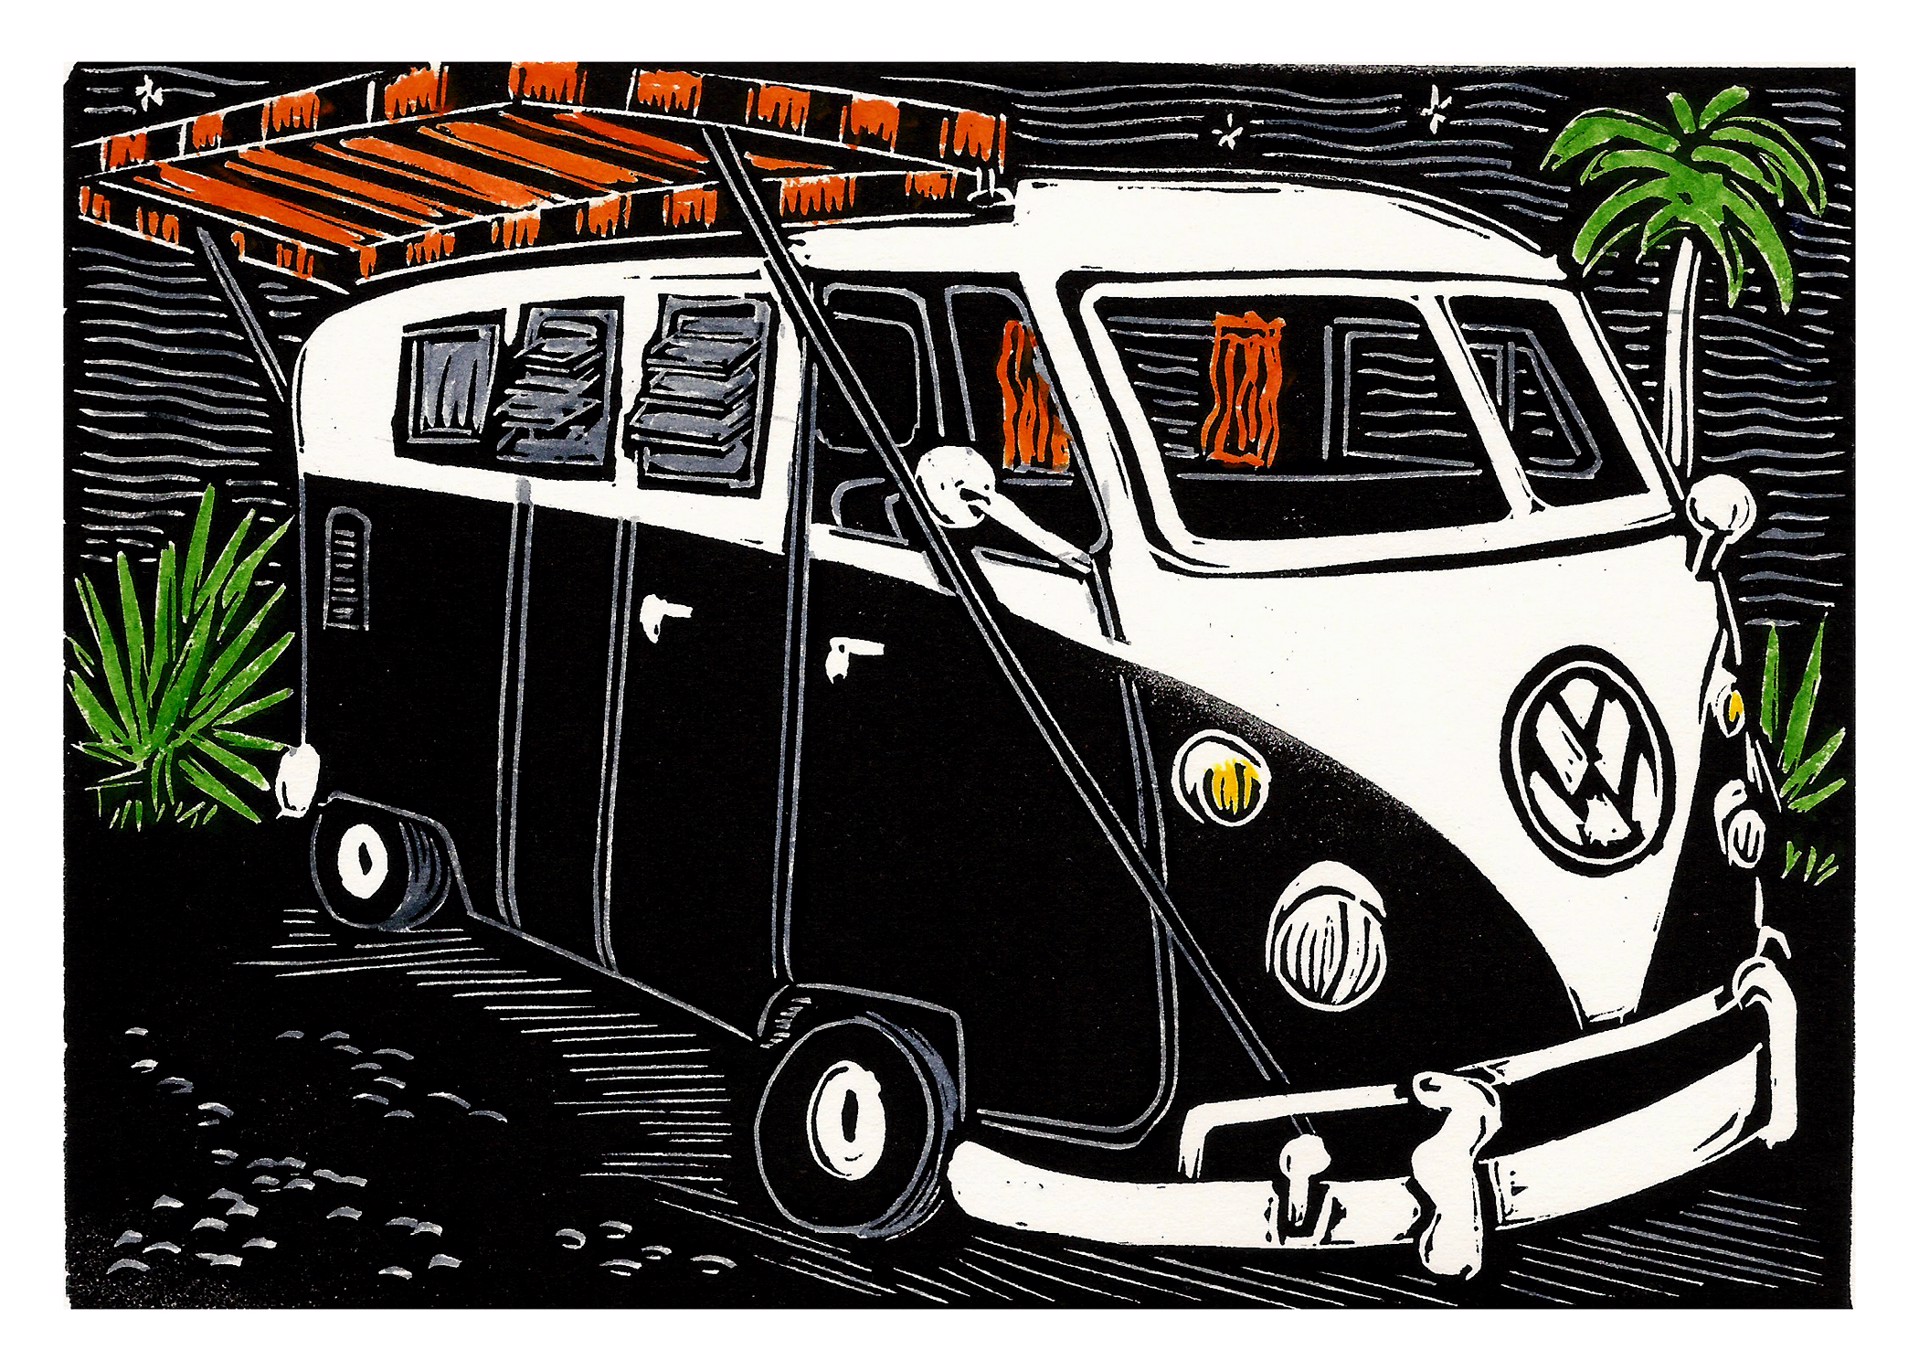 Untitled (VW Camper) 1/50 by Diana Tonnessen